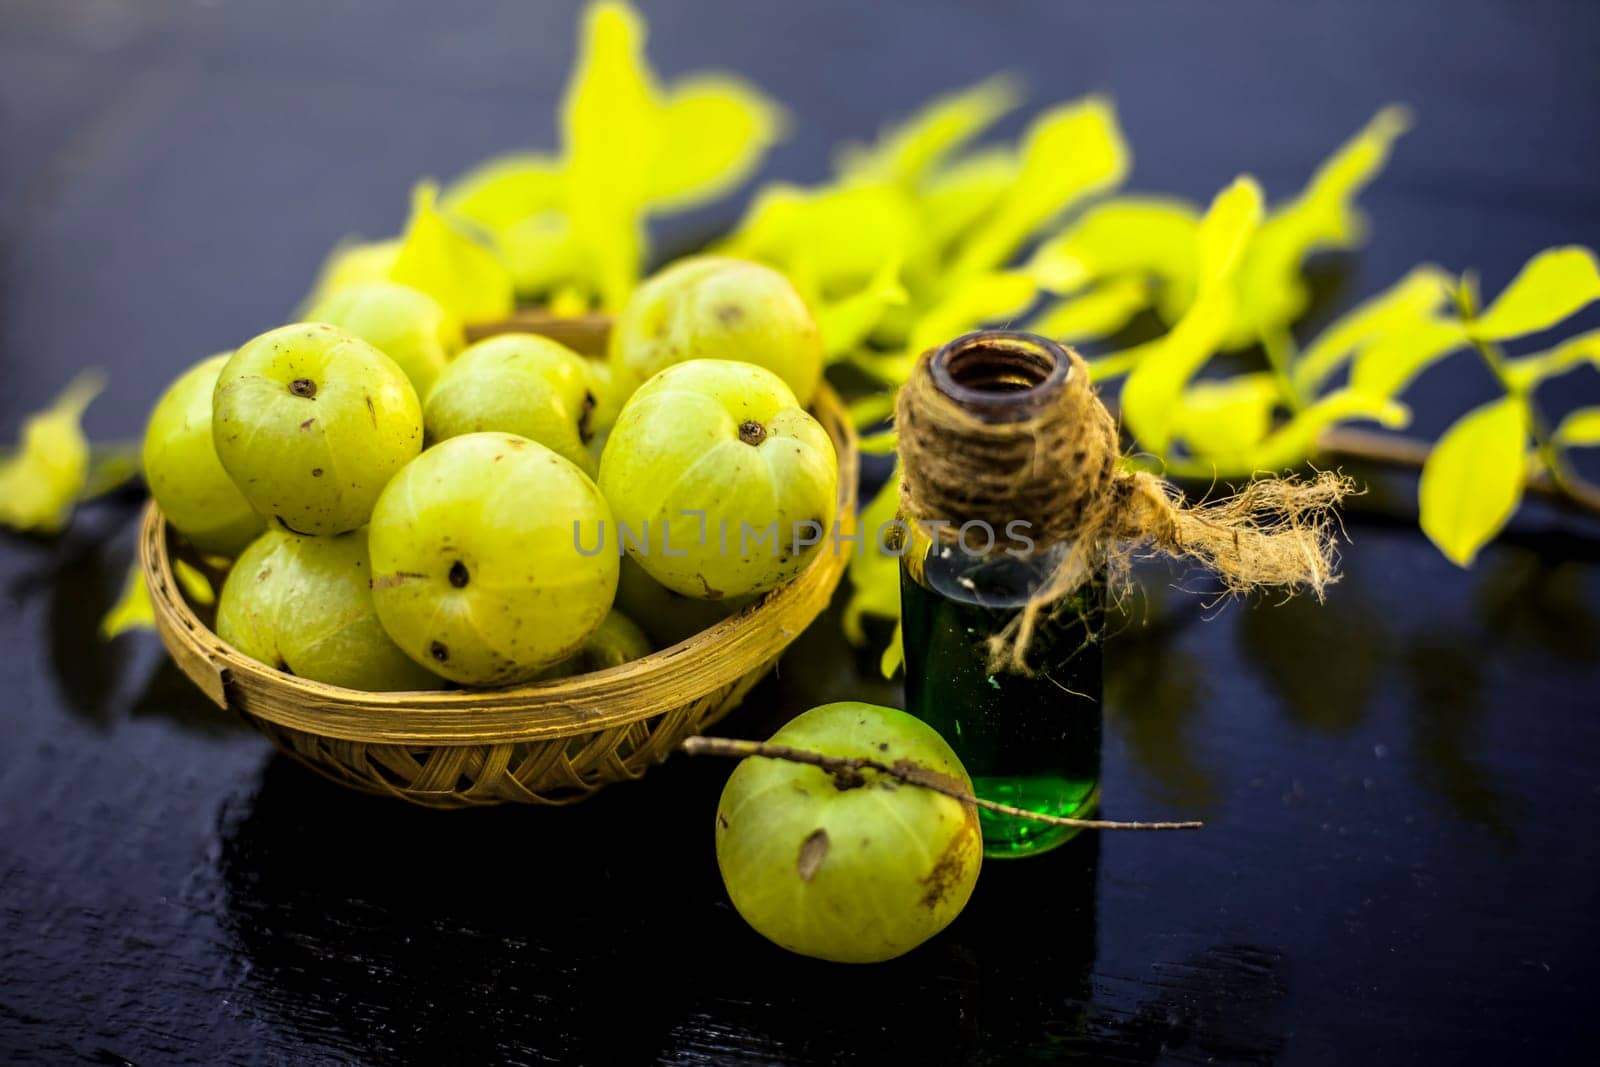 Close-up of Indian gooseberry with its extracted essence or concentration in a transparent bottle on a wooden surface with raw amla in a fruit and vegetable basket.